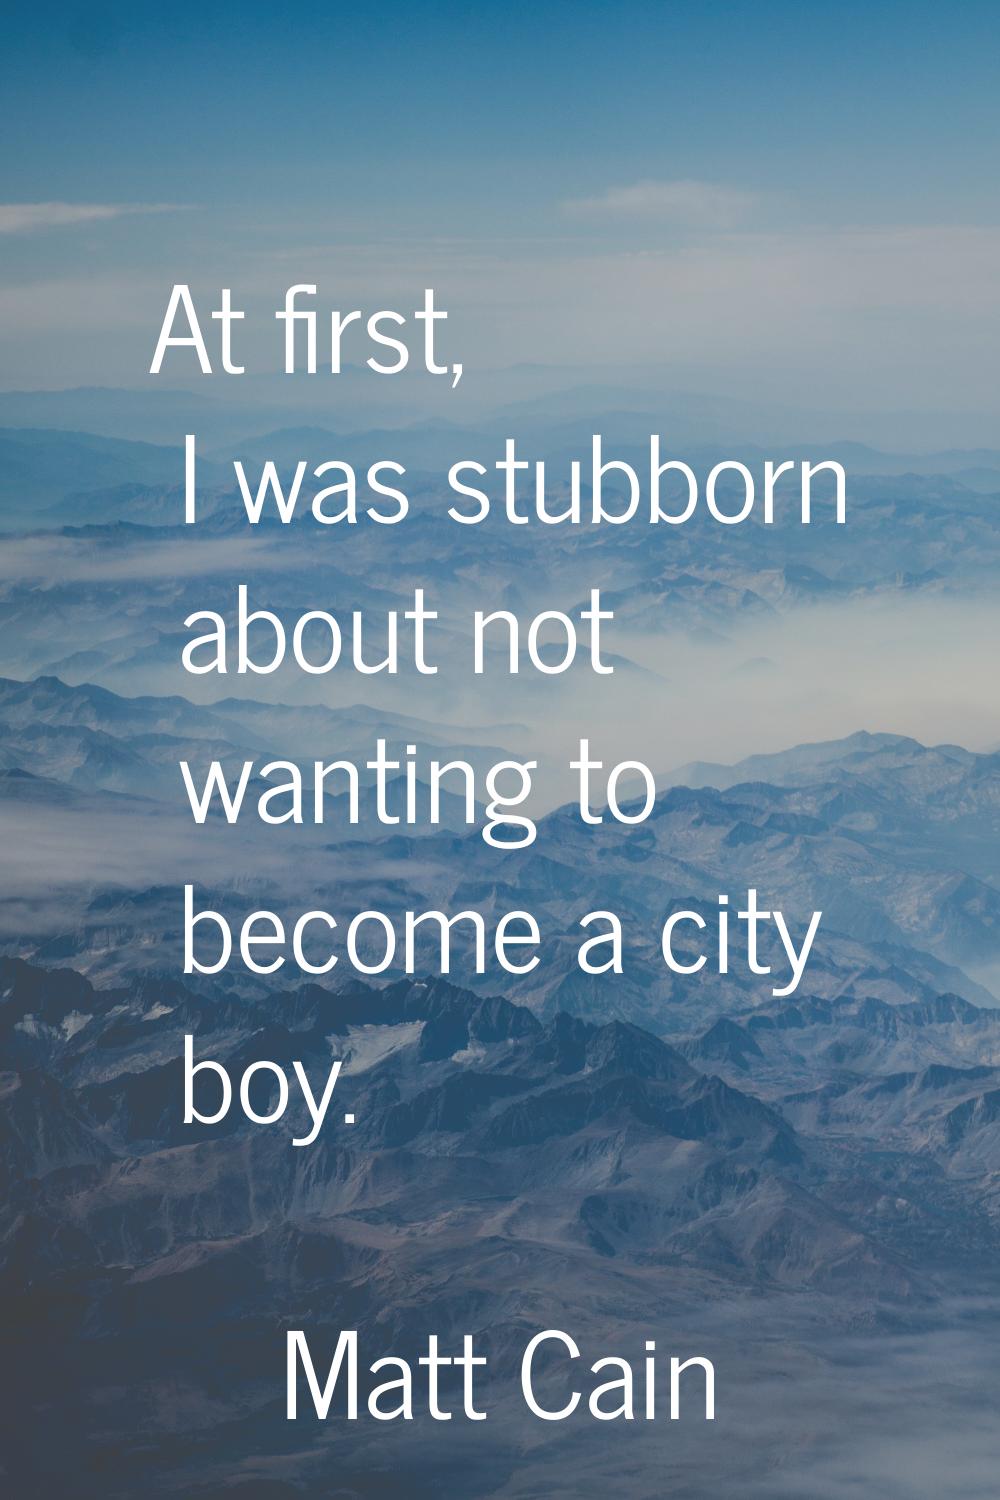 At first, I was stubborn about not wanting to become a city boy.